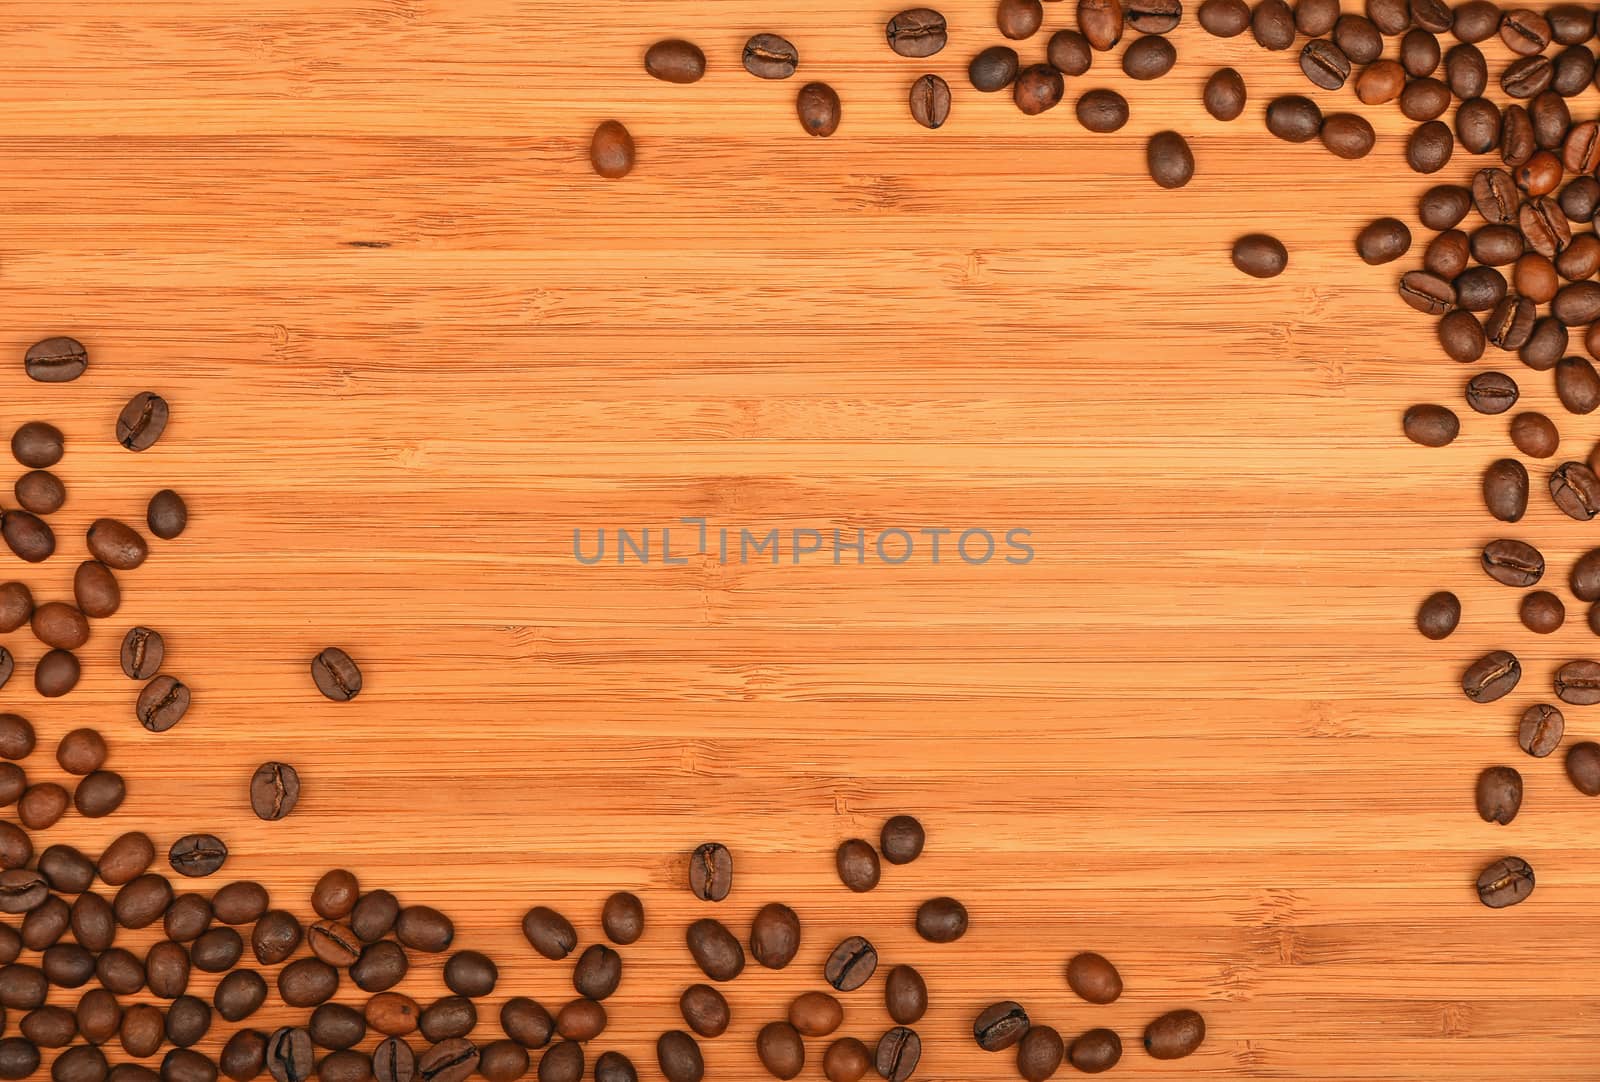 Roasted Arabica coffee espresso beans shape corners border over wooden bamboo board background